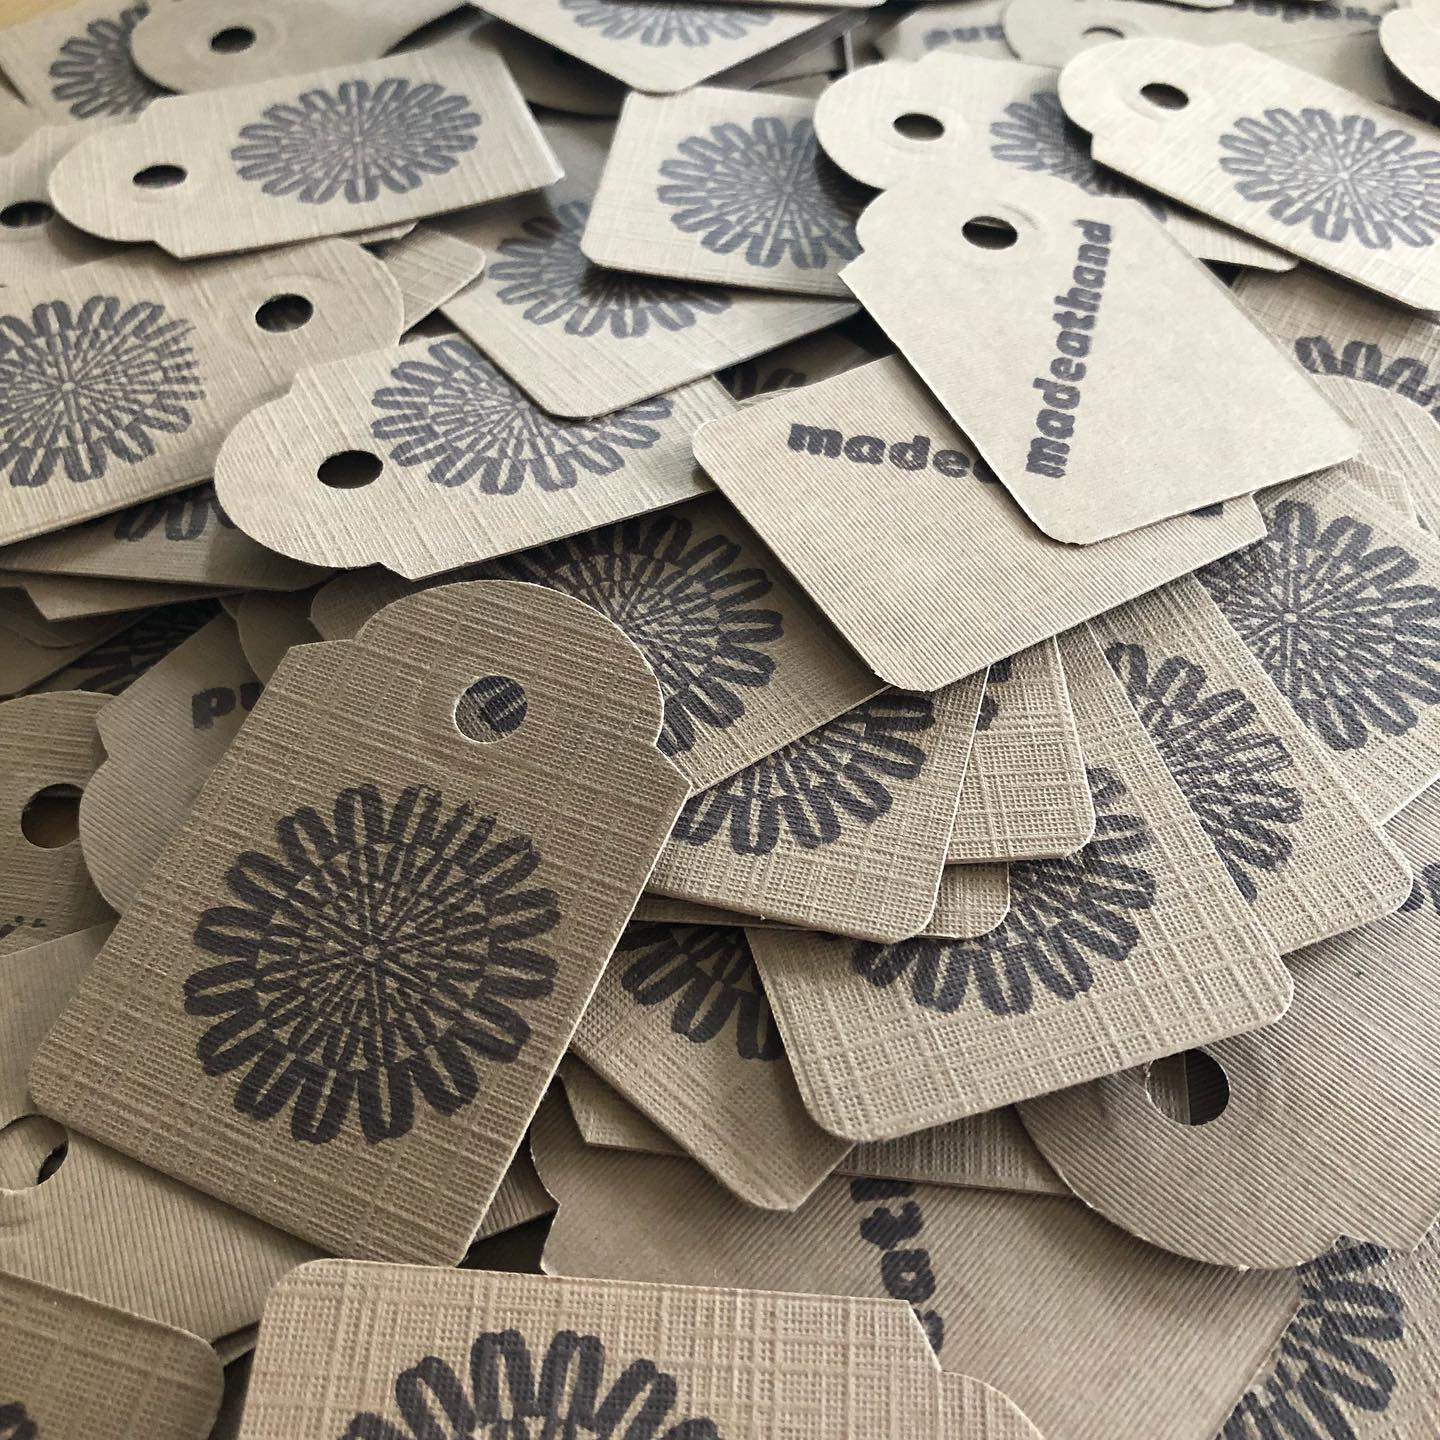 MadeAtHand paper tags